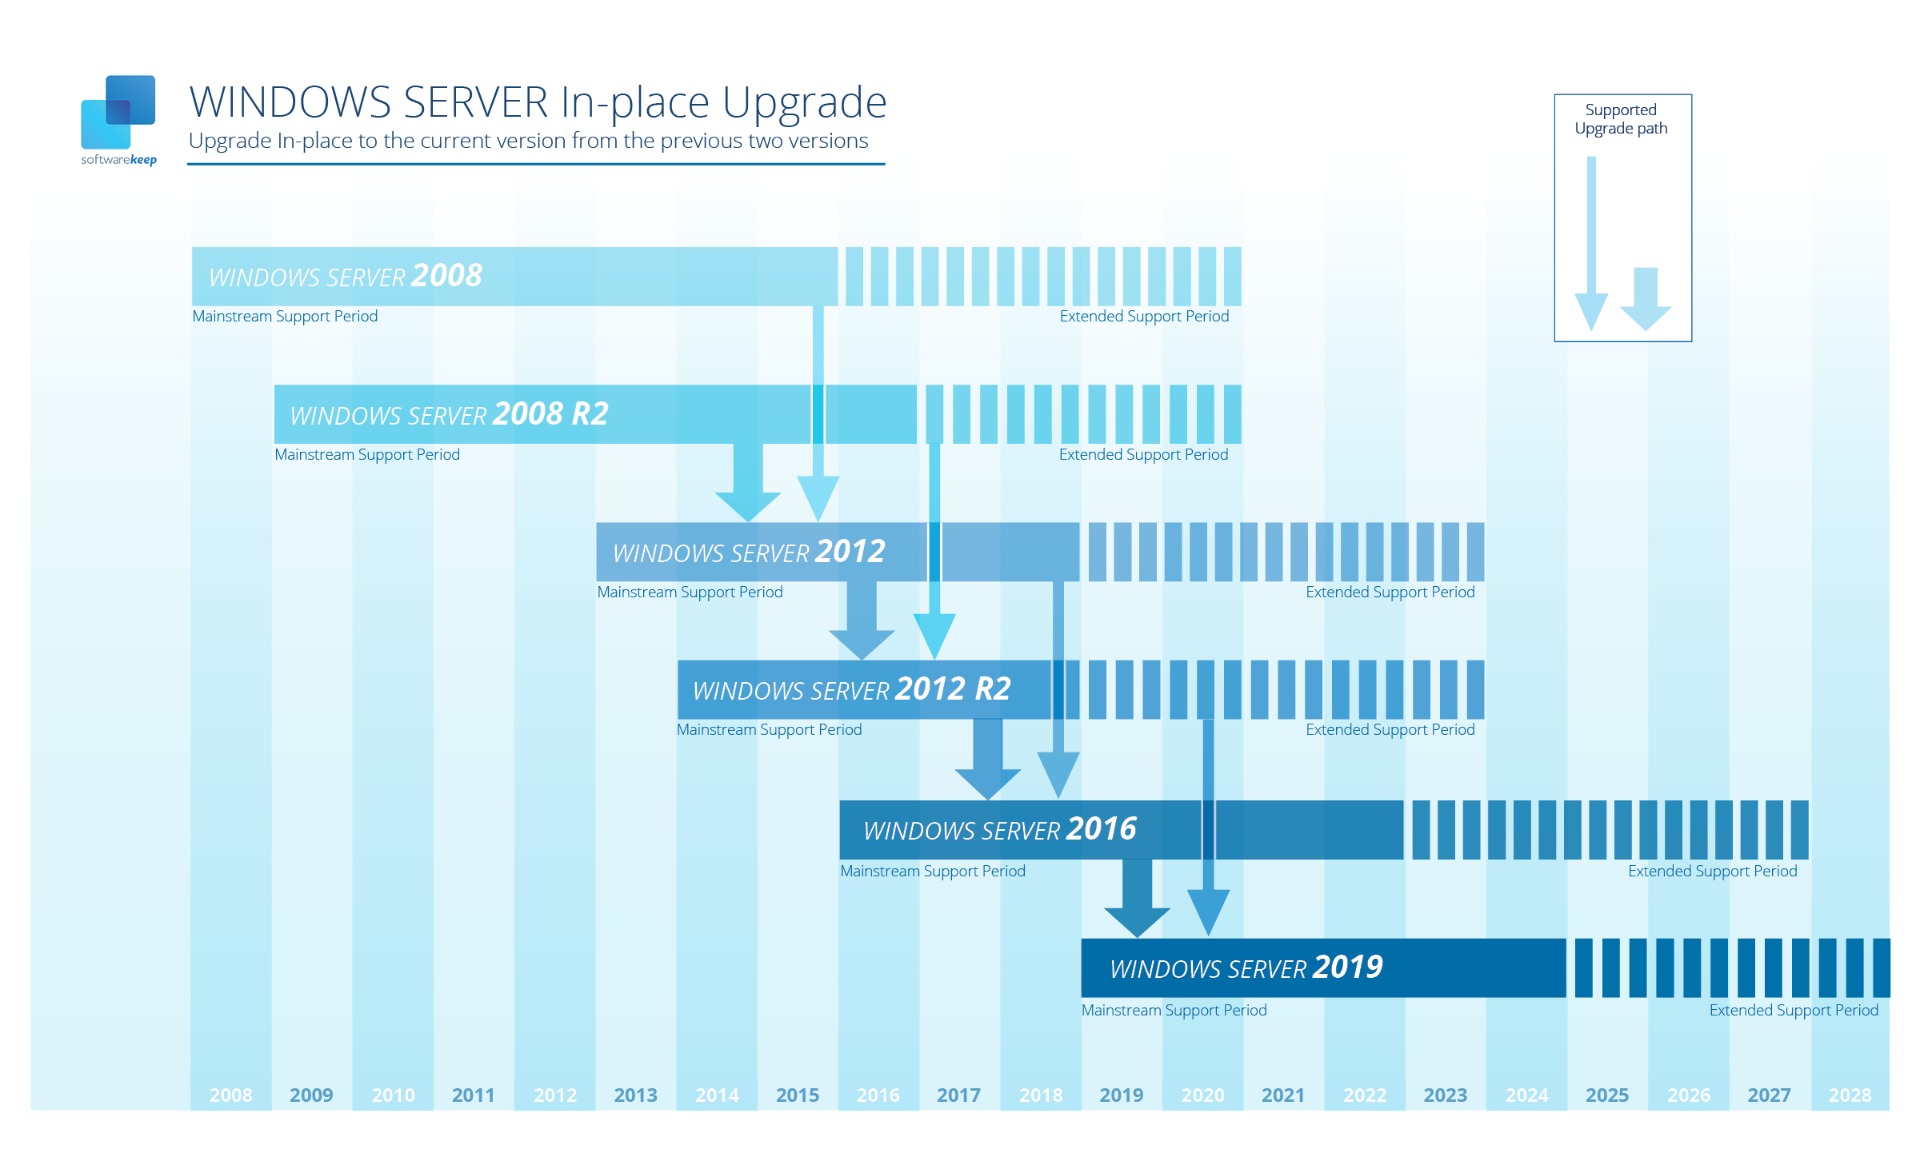 Windows server in-place upgrade